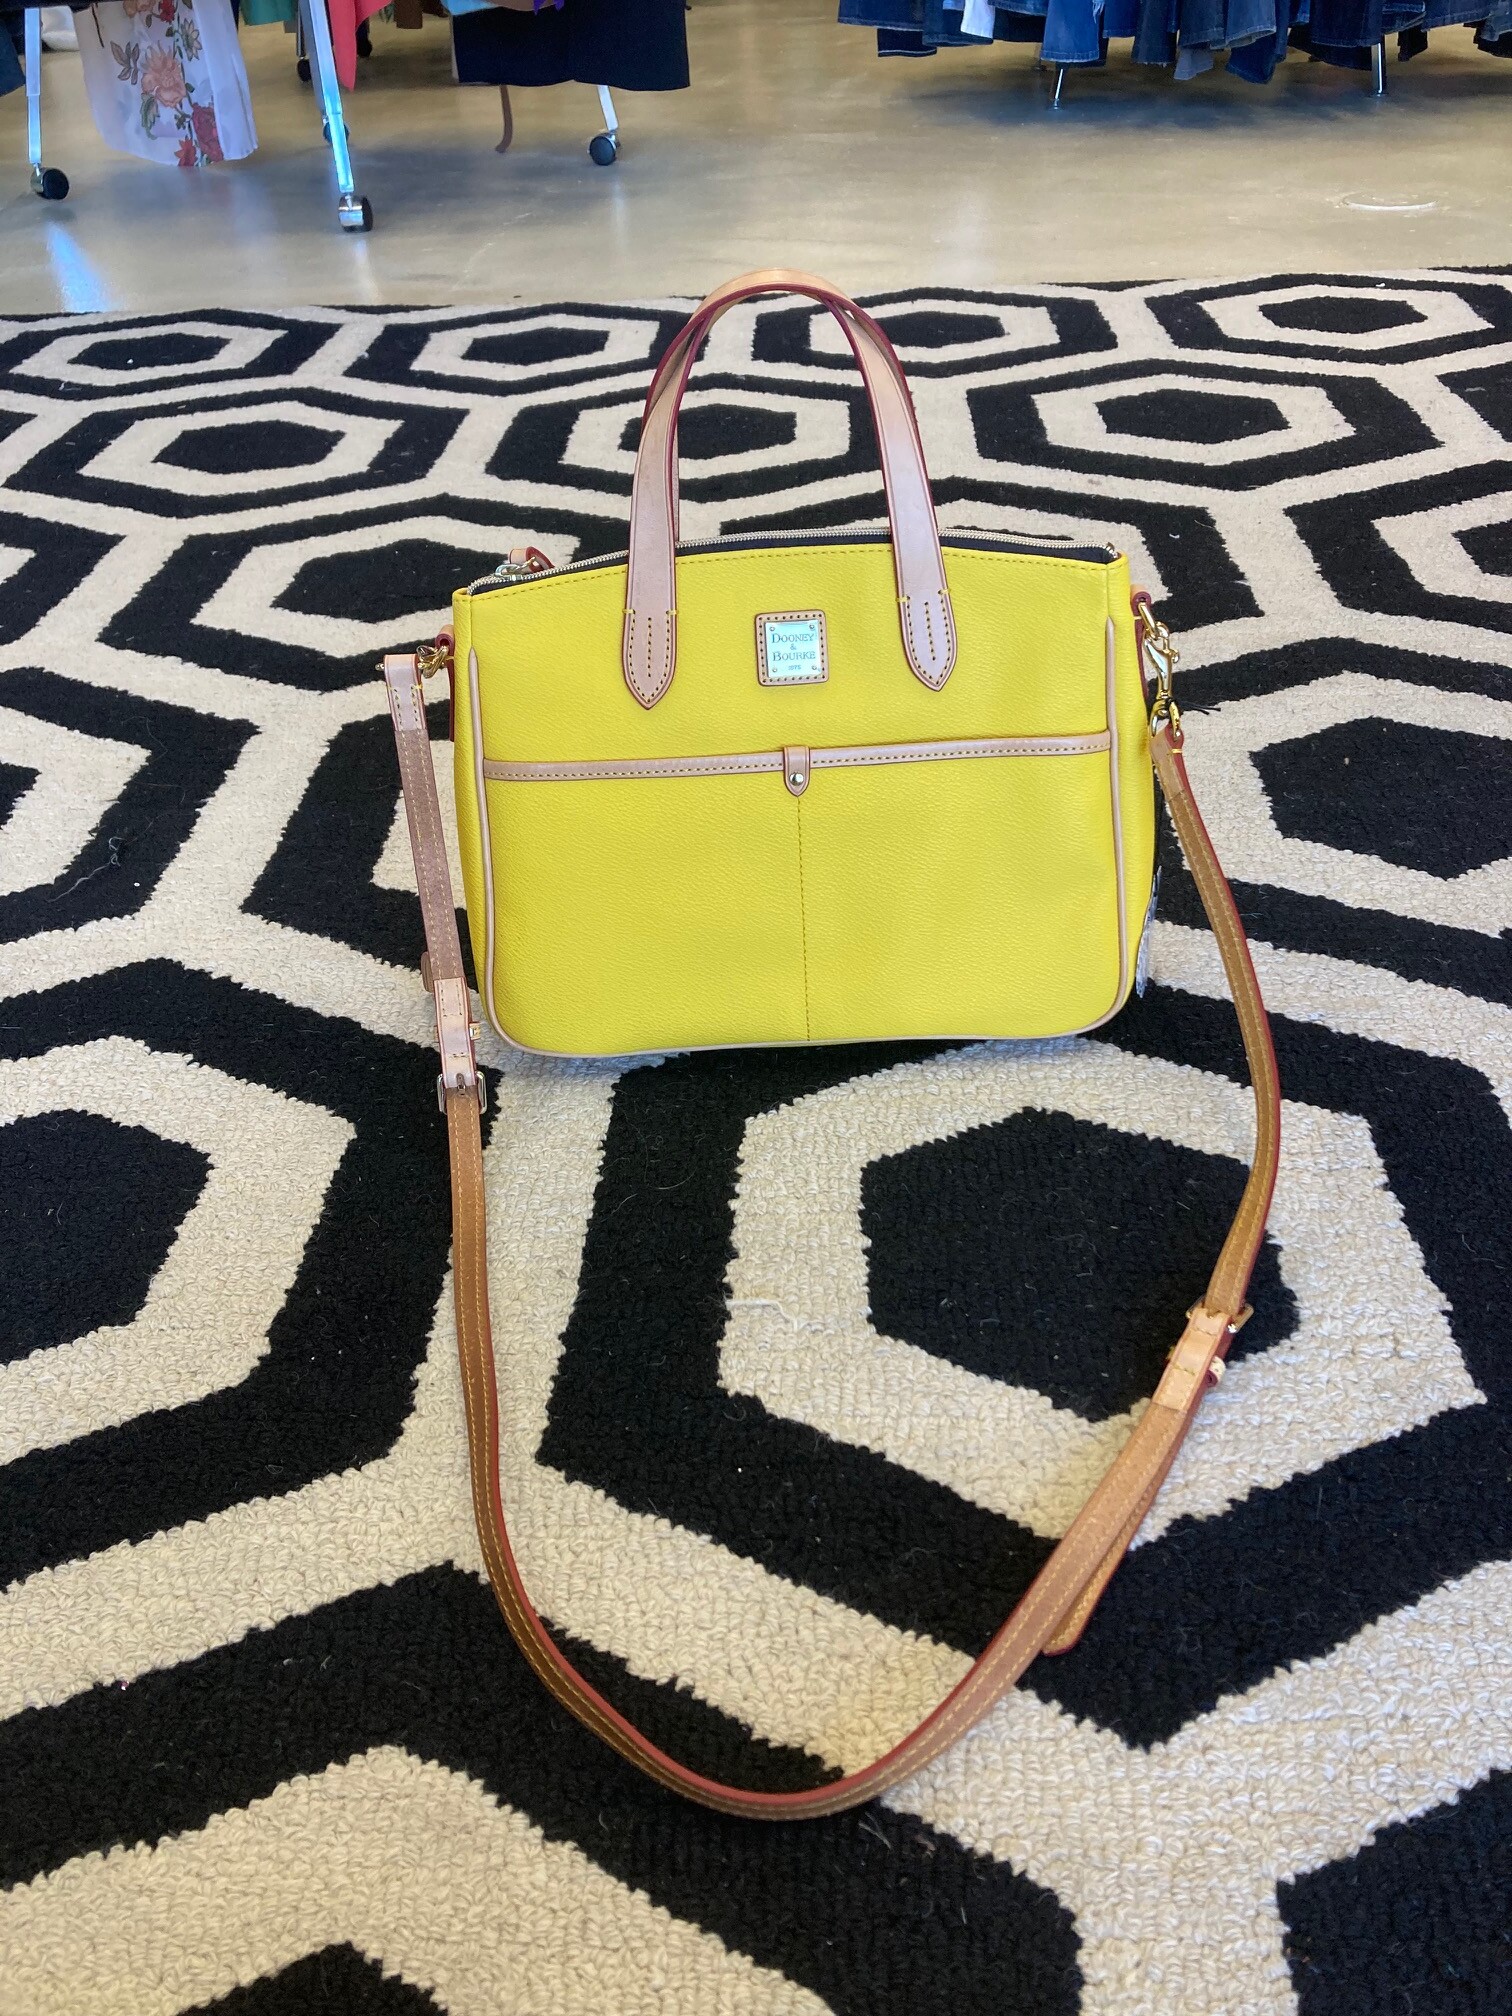 Dooney & Bourke Purse: Add some sunshine to your style with this Dooney & Bourke! Never been carried.  Medium size with crossbody strap.